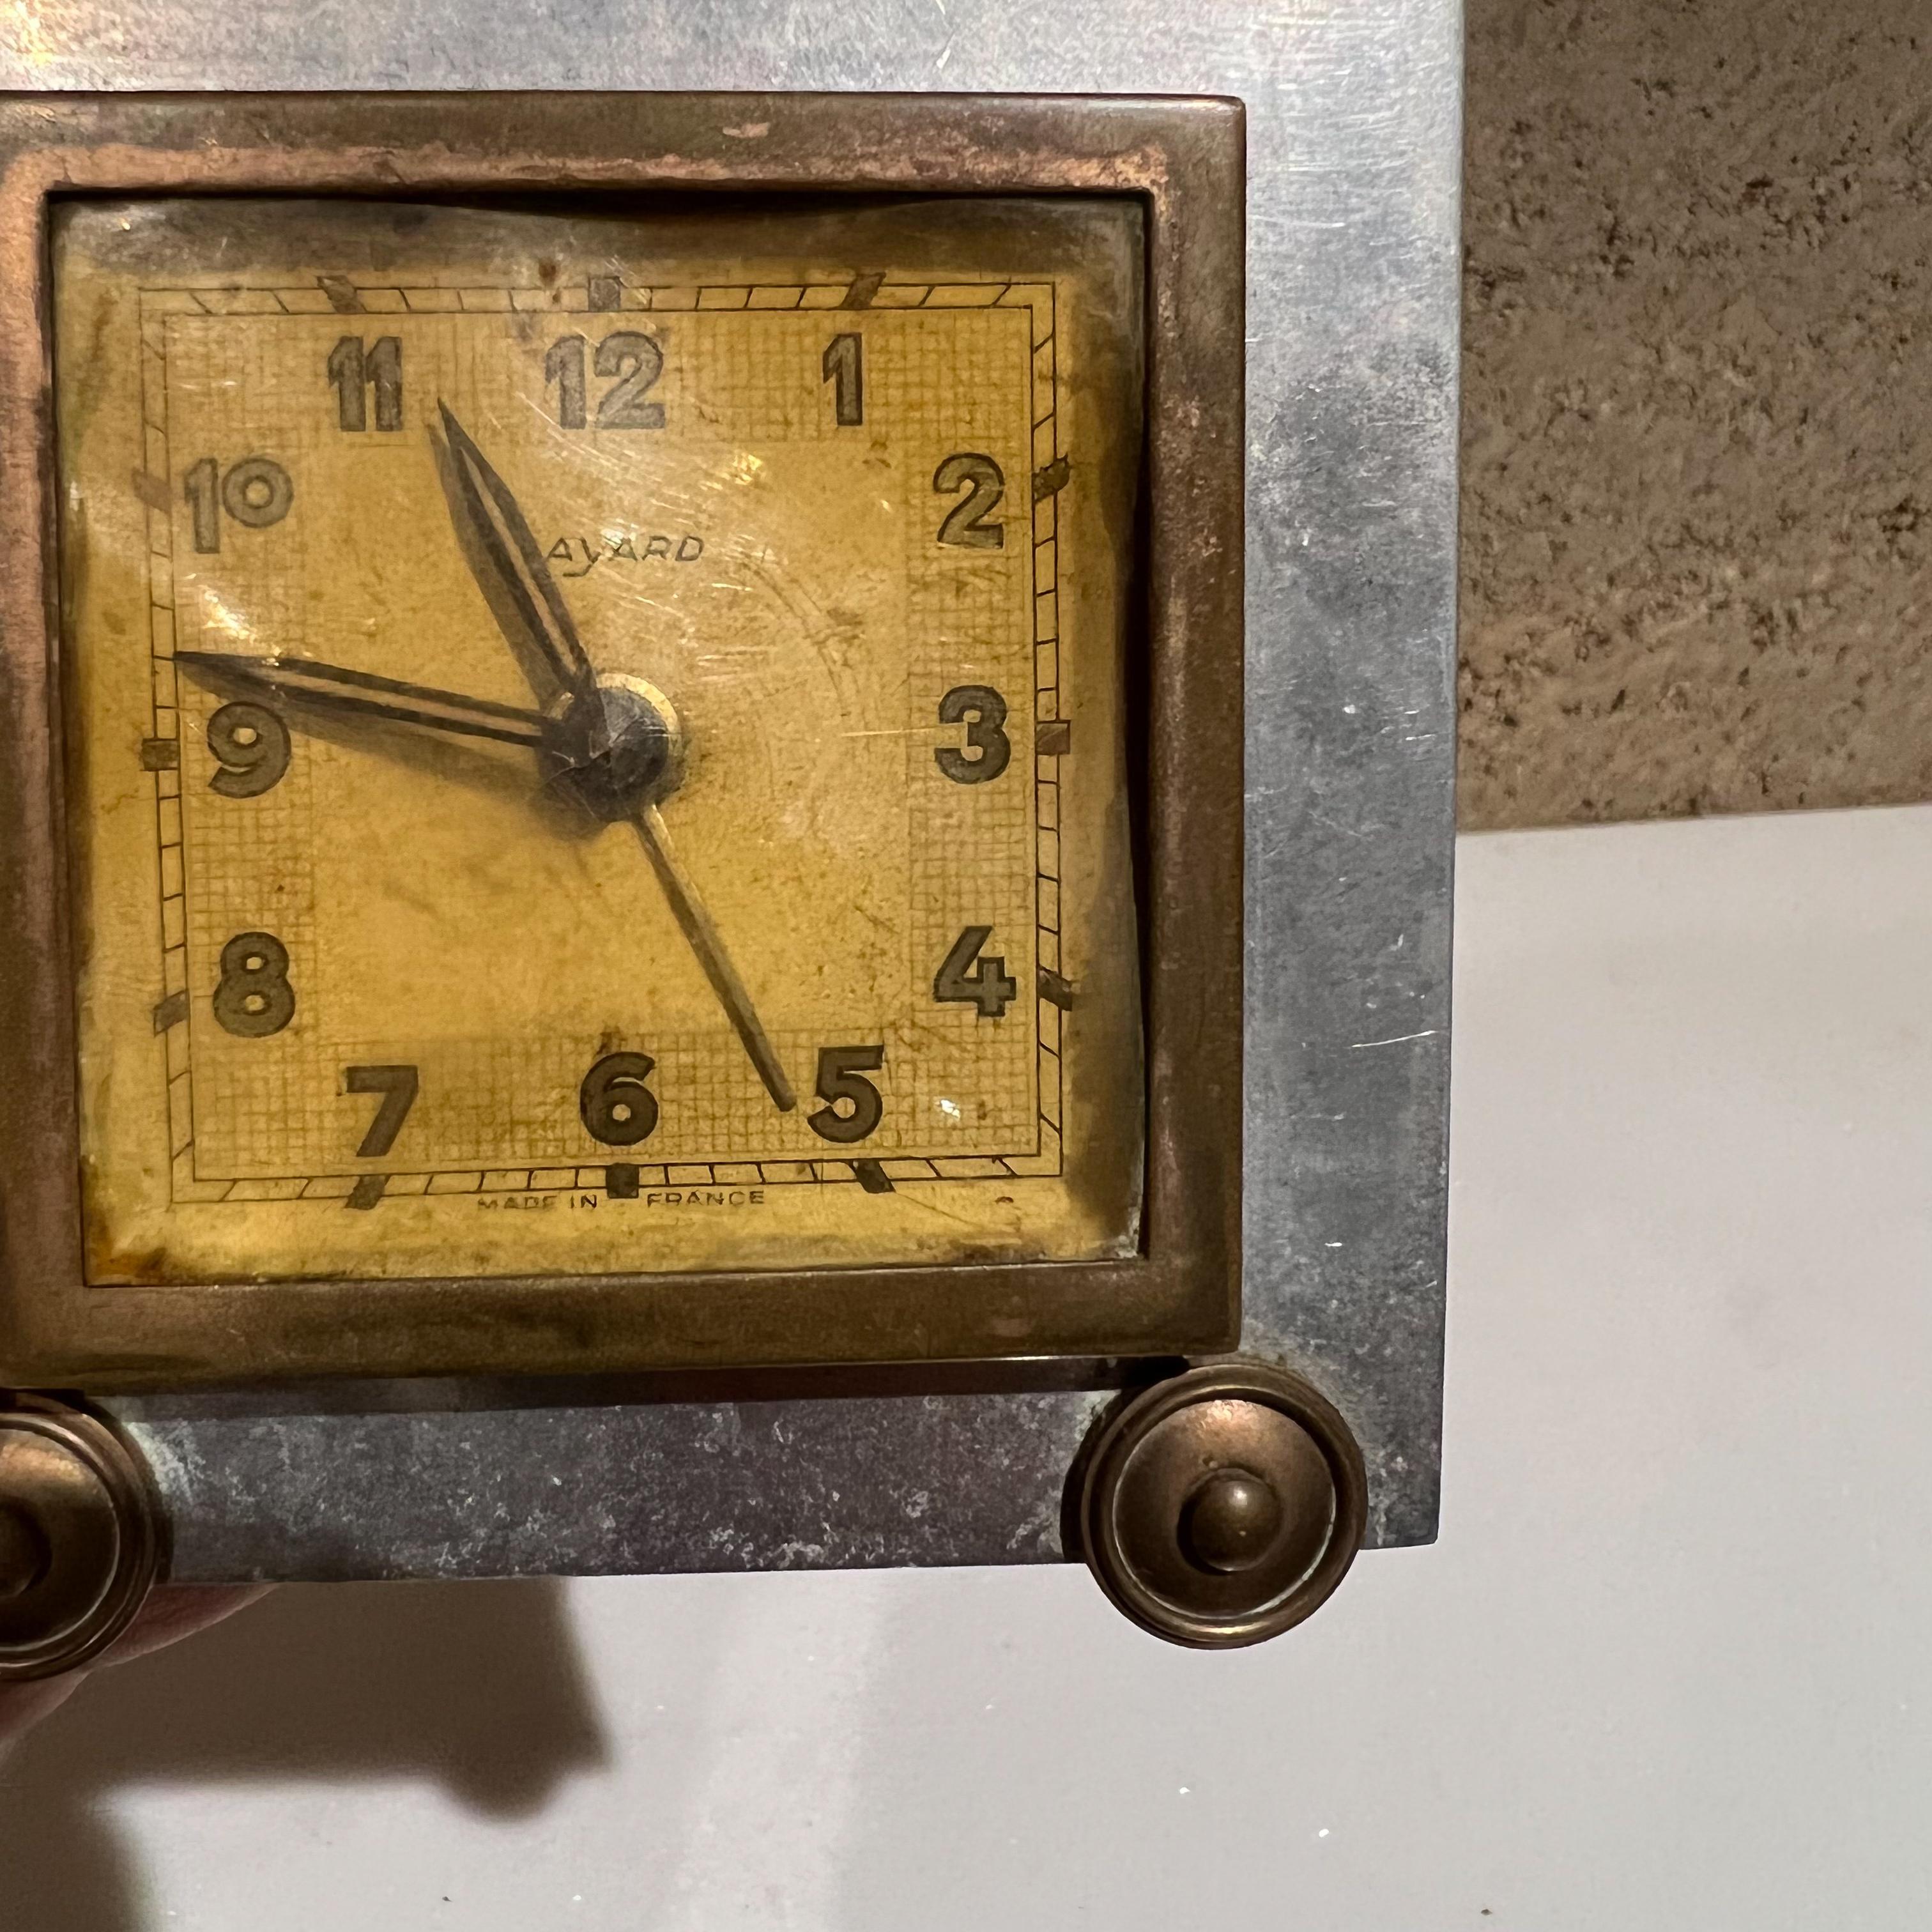 1940s France Bayard Art Deco square table clock old french vintage decor
Stamped by maker. Made in France.
Fabulous vintage decorative French find.
Measures: 3.75 tall x 3.5 W x 2.25 D
Preowned unrestored nonfunctioning clock, vintage condition.